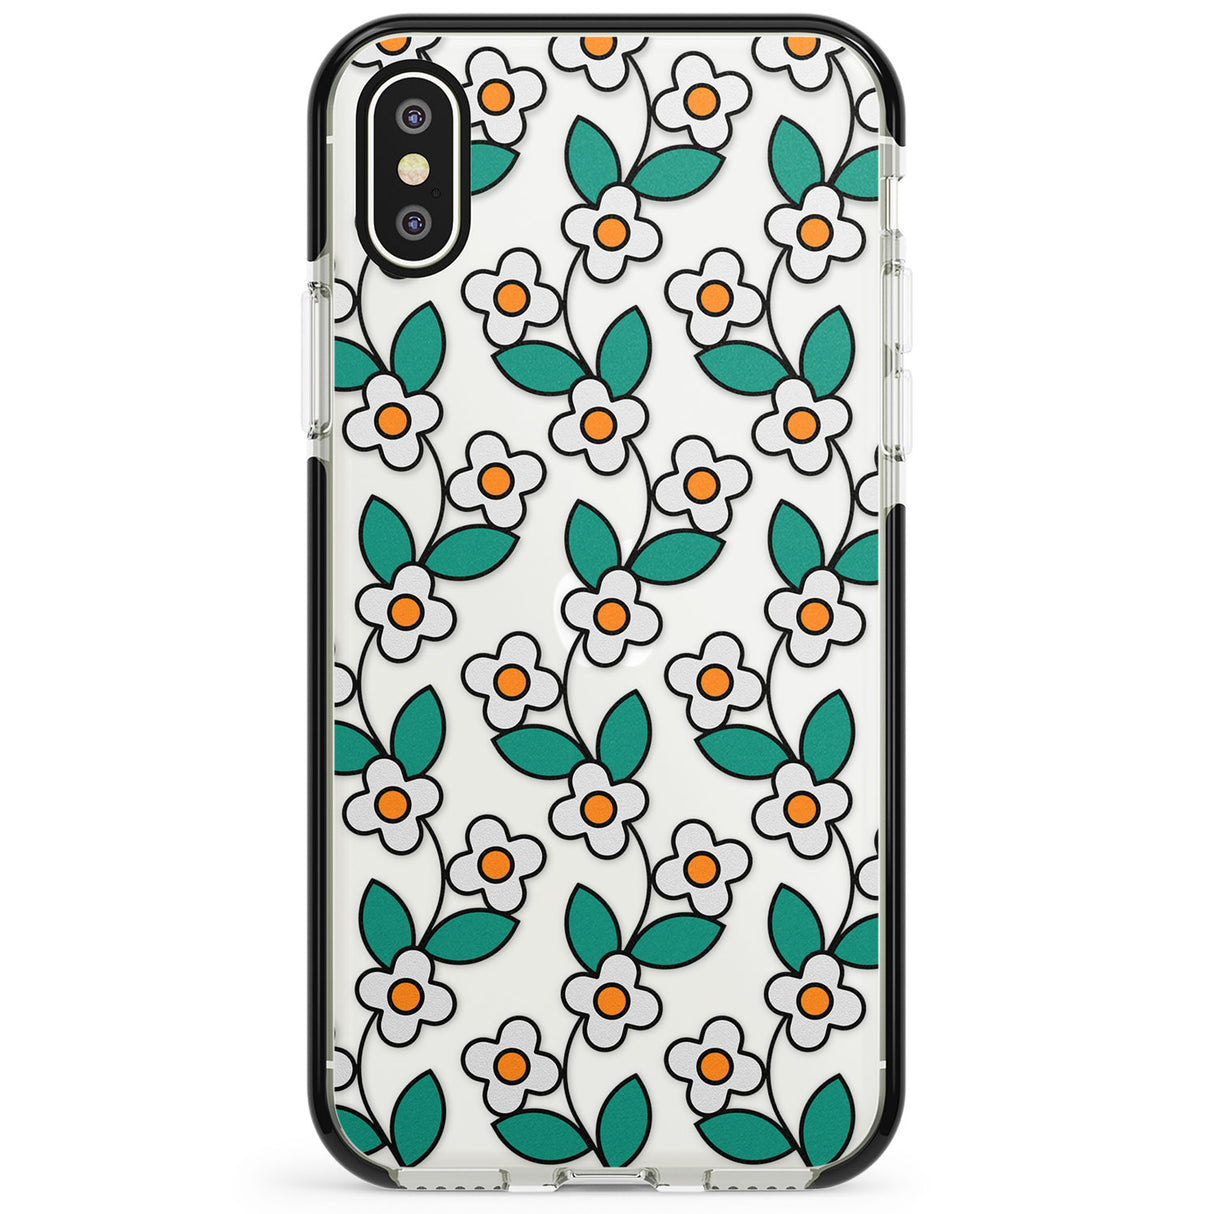 Spring Daisies Phone Case for iPhone X XS Max XR